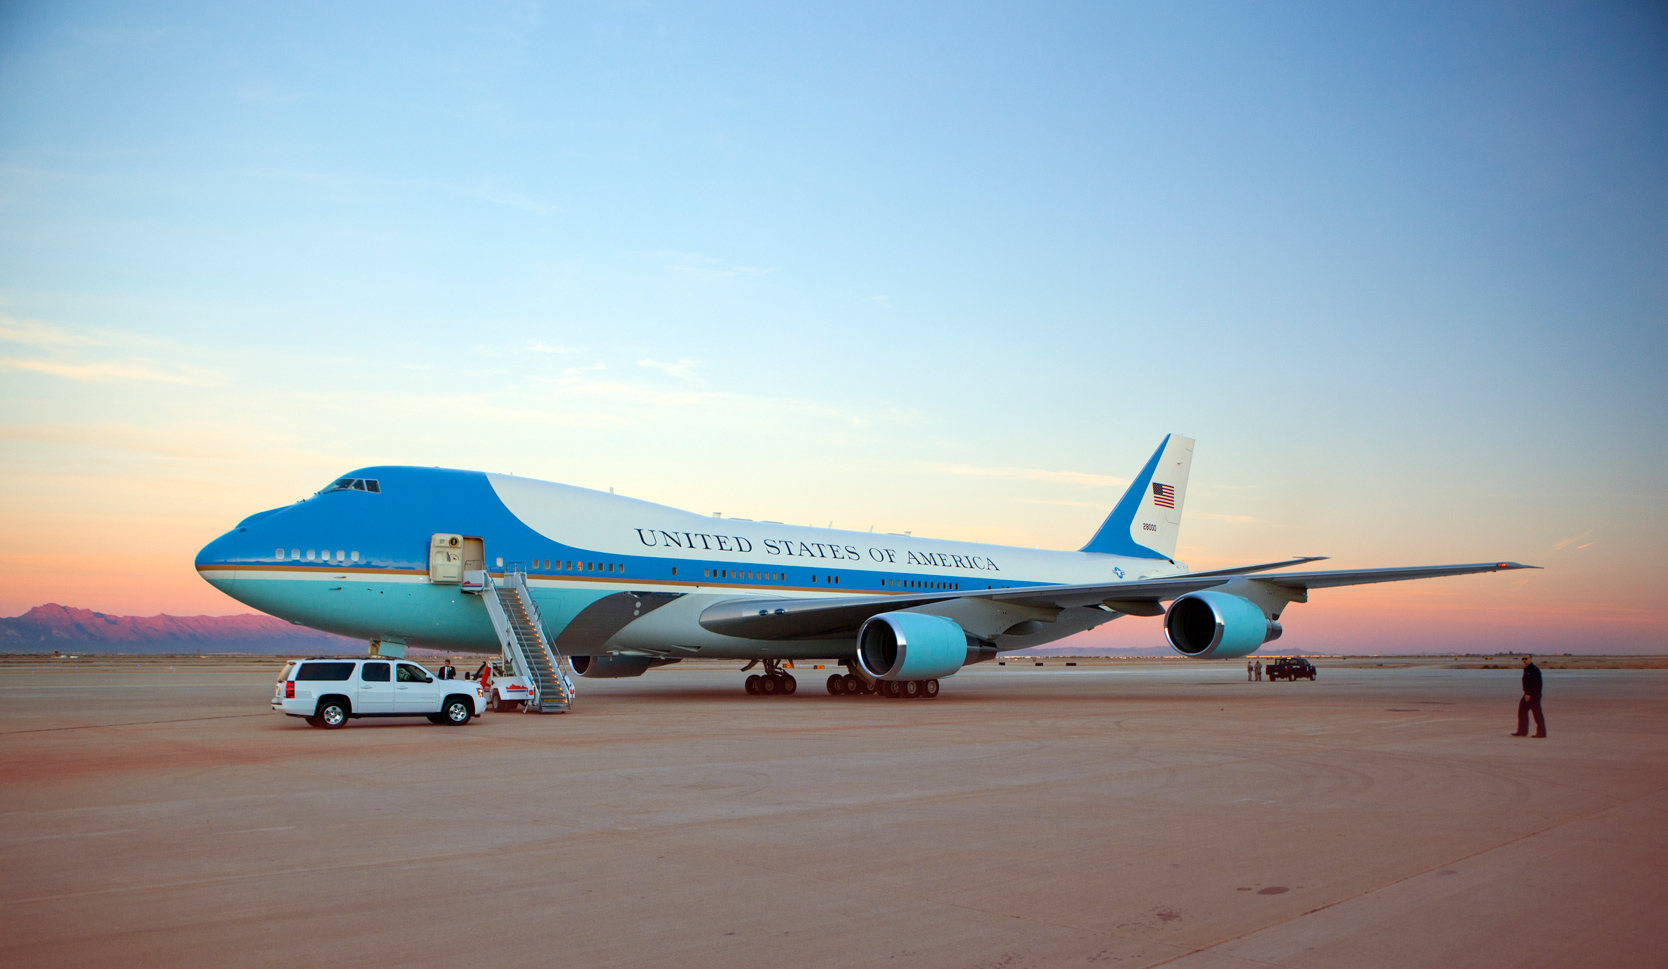 For Presidents Day: Fun Facts about Air Force One